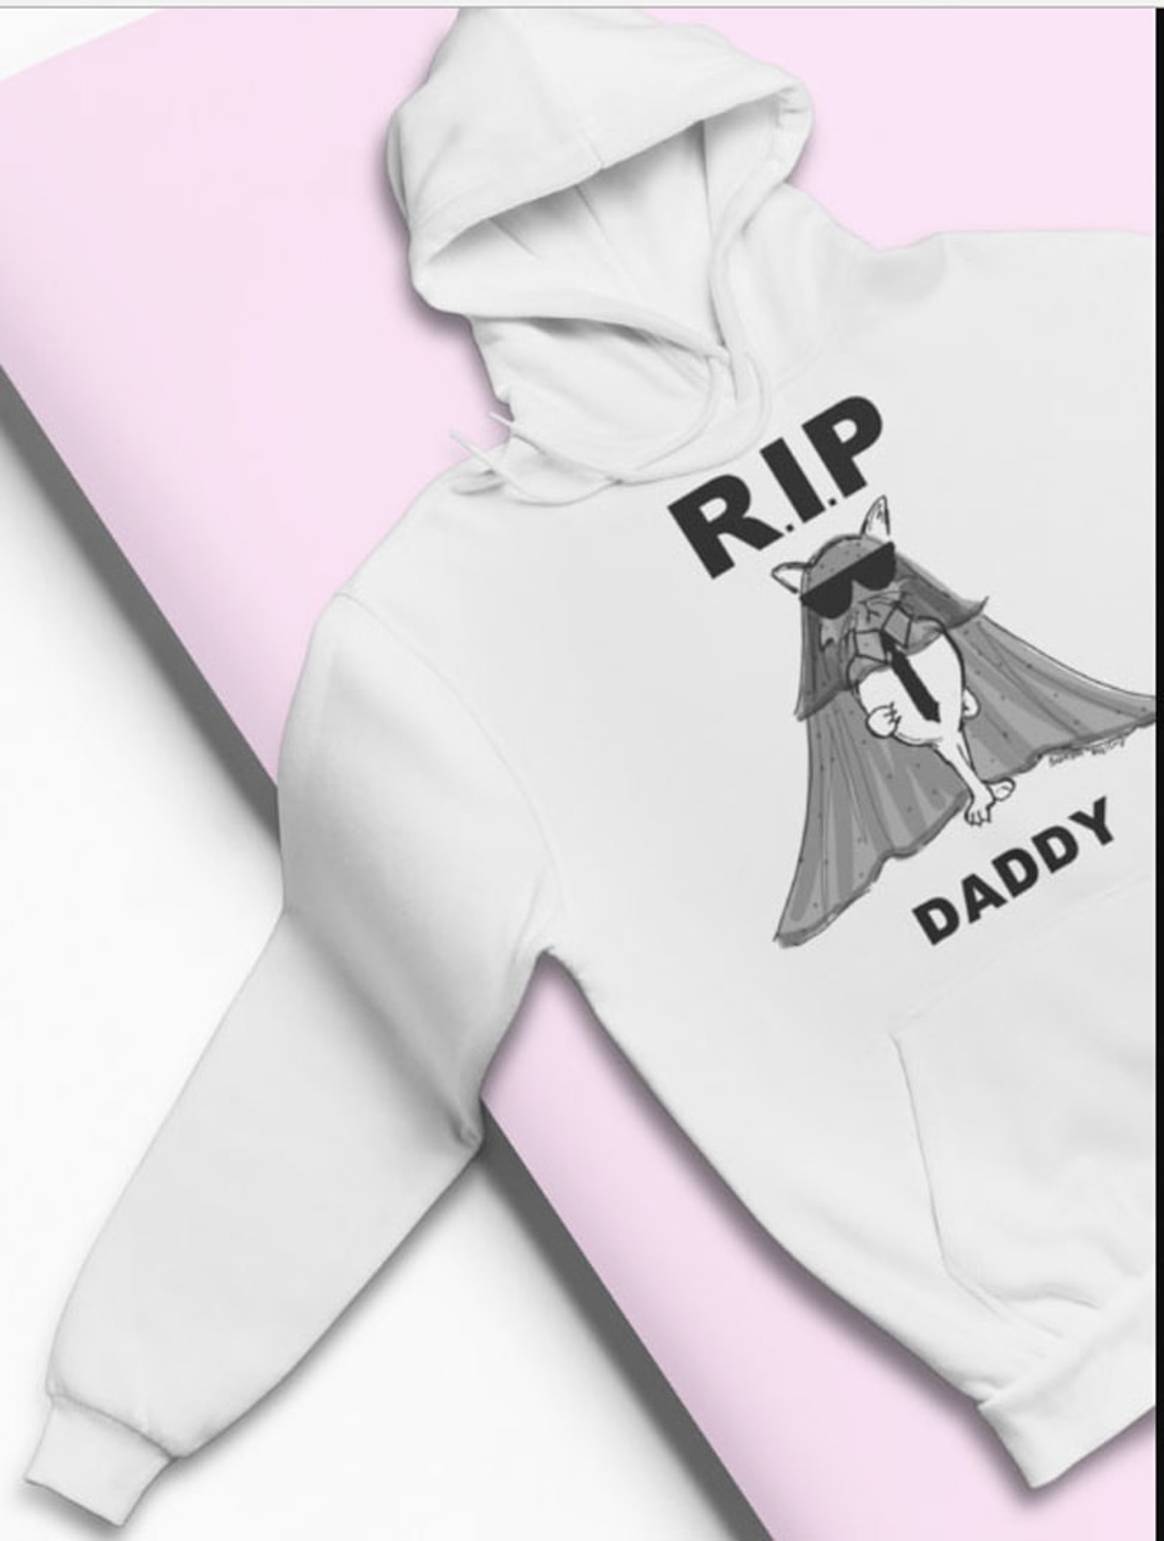 Rouwende poes Karl Lagerfeld lanceert limited edition collectie #RIPDaddy